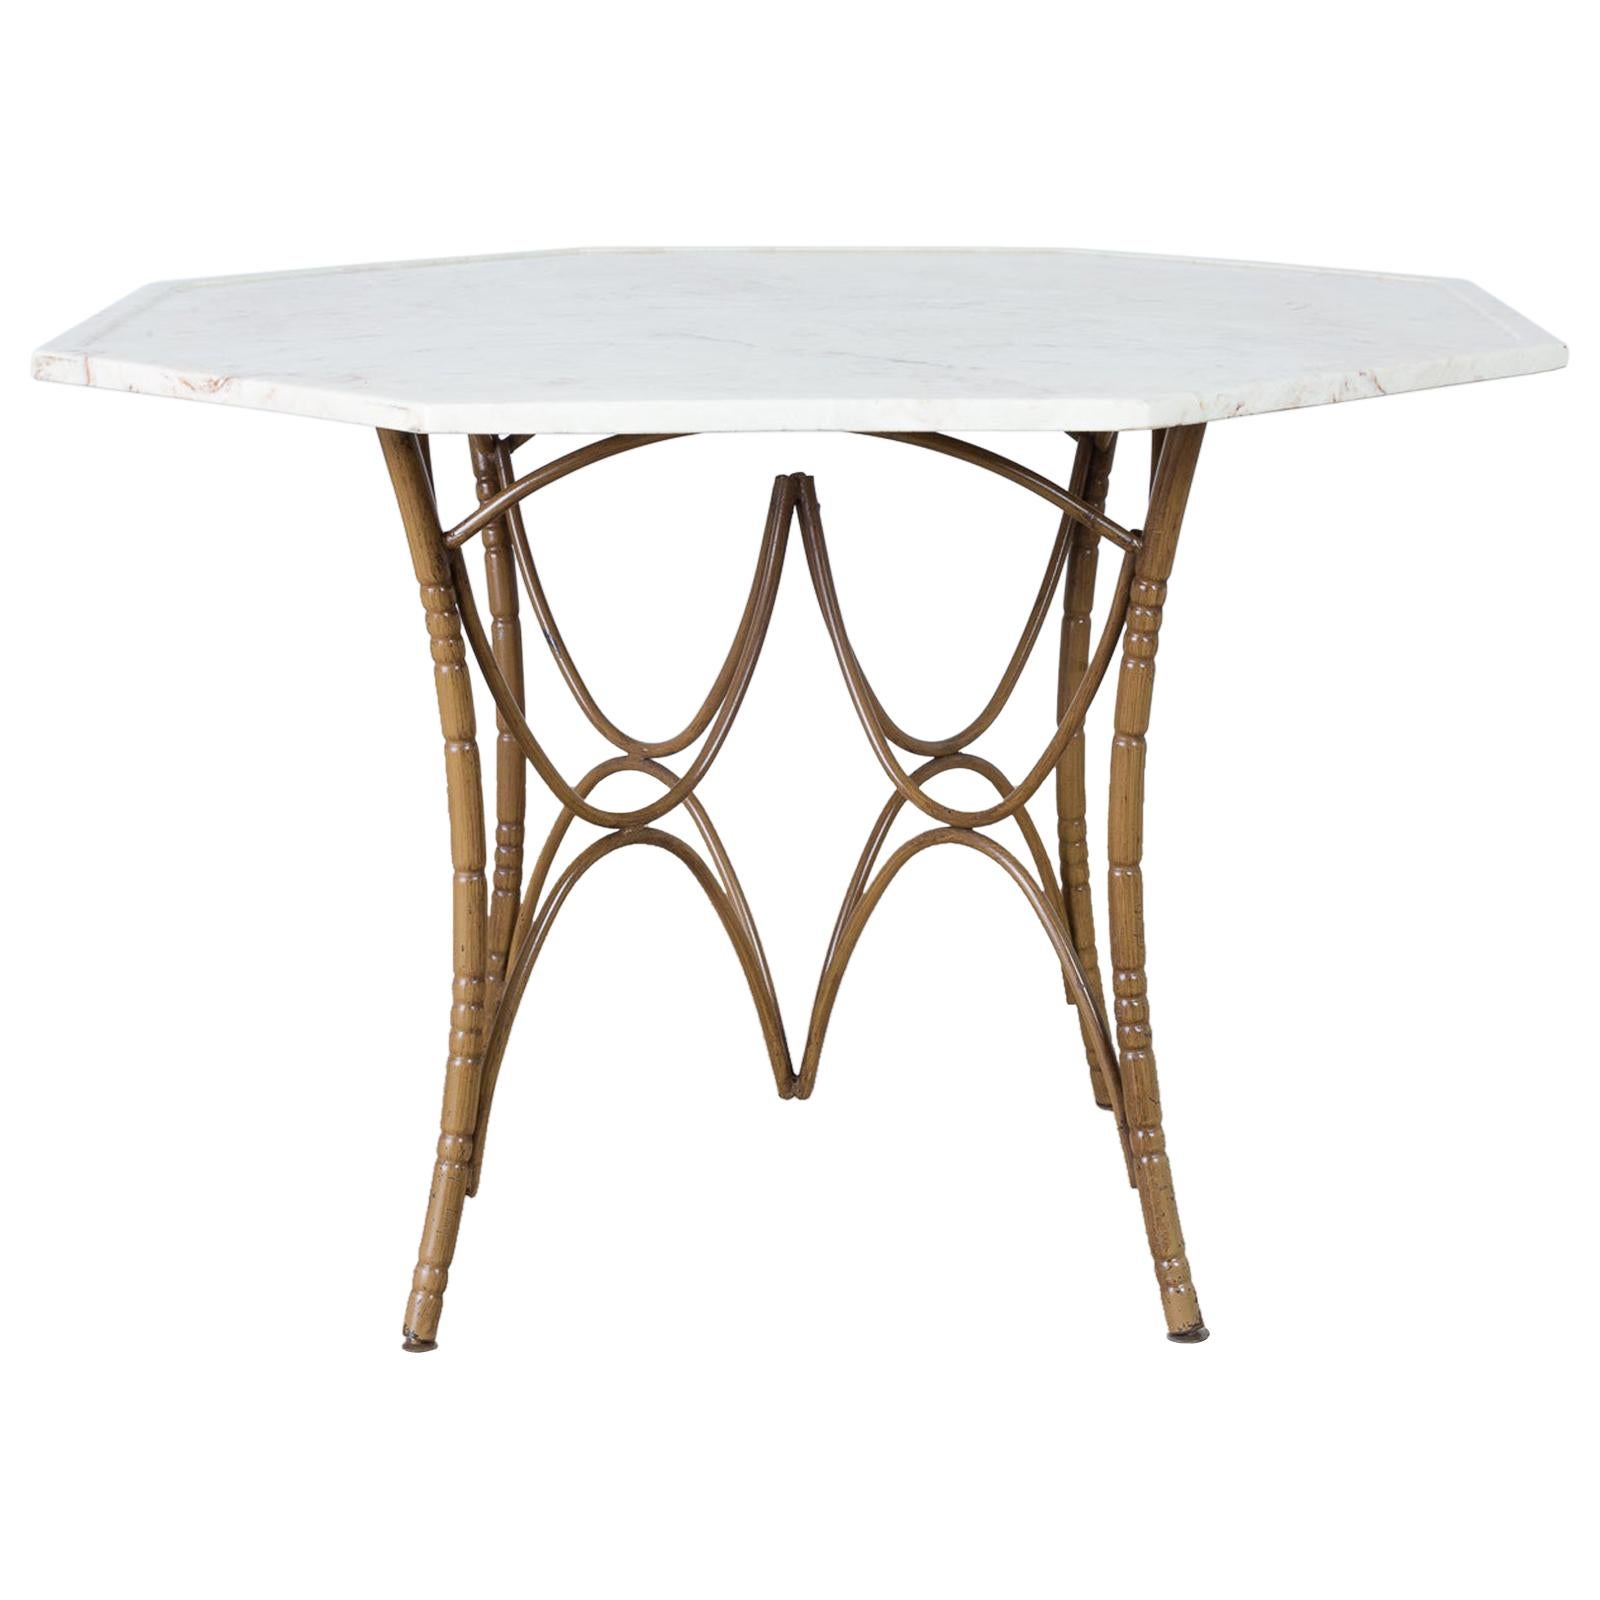 Italian Midcentury Faux Bamboo Marble-Top Dining Table